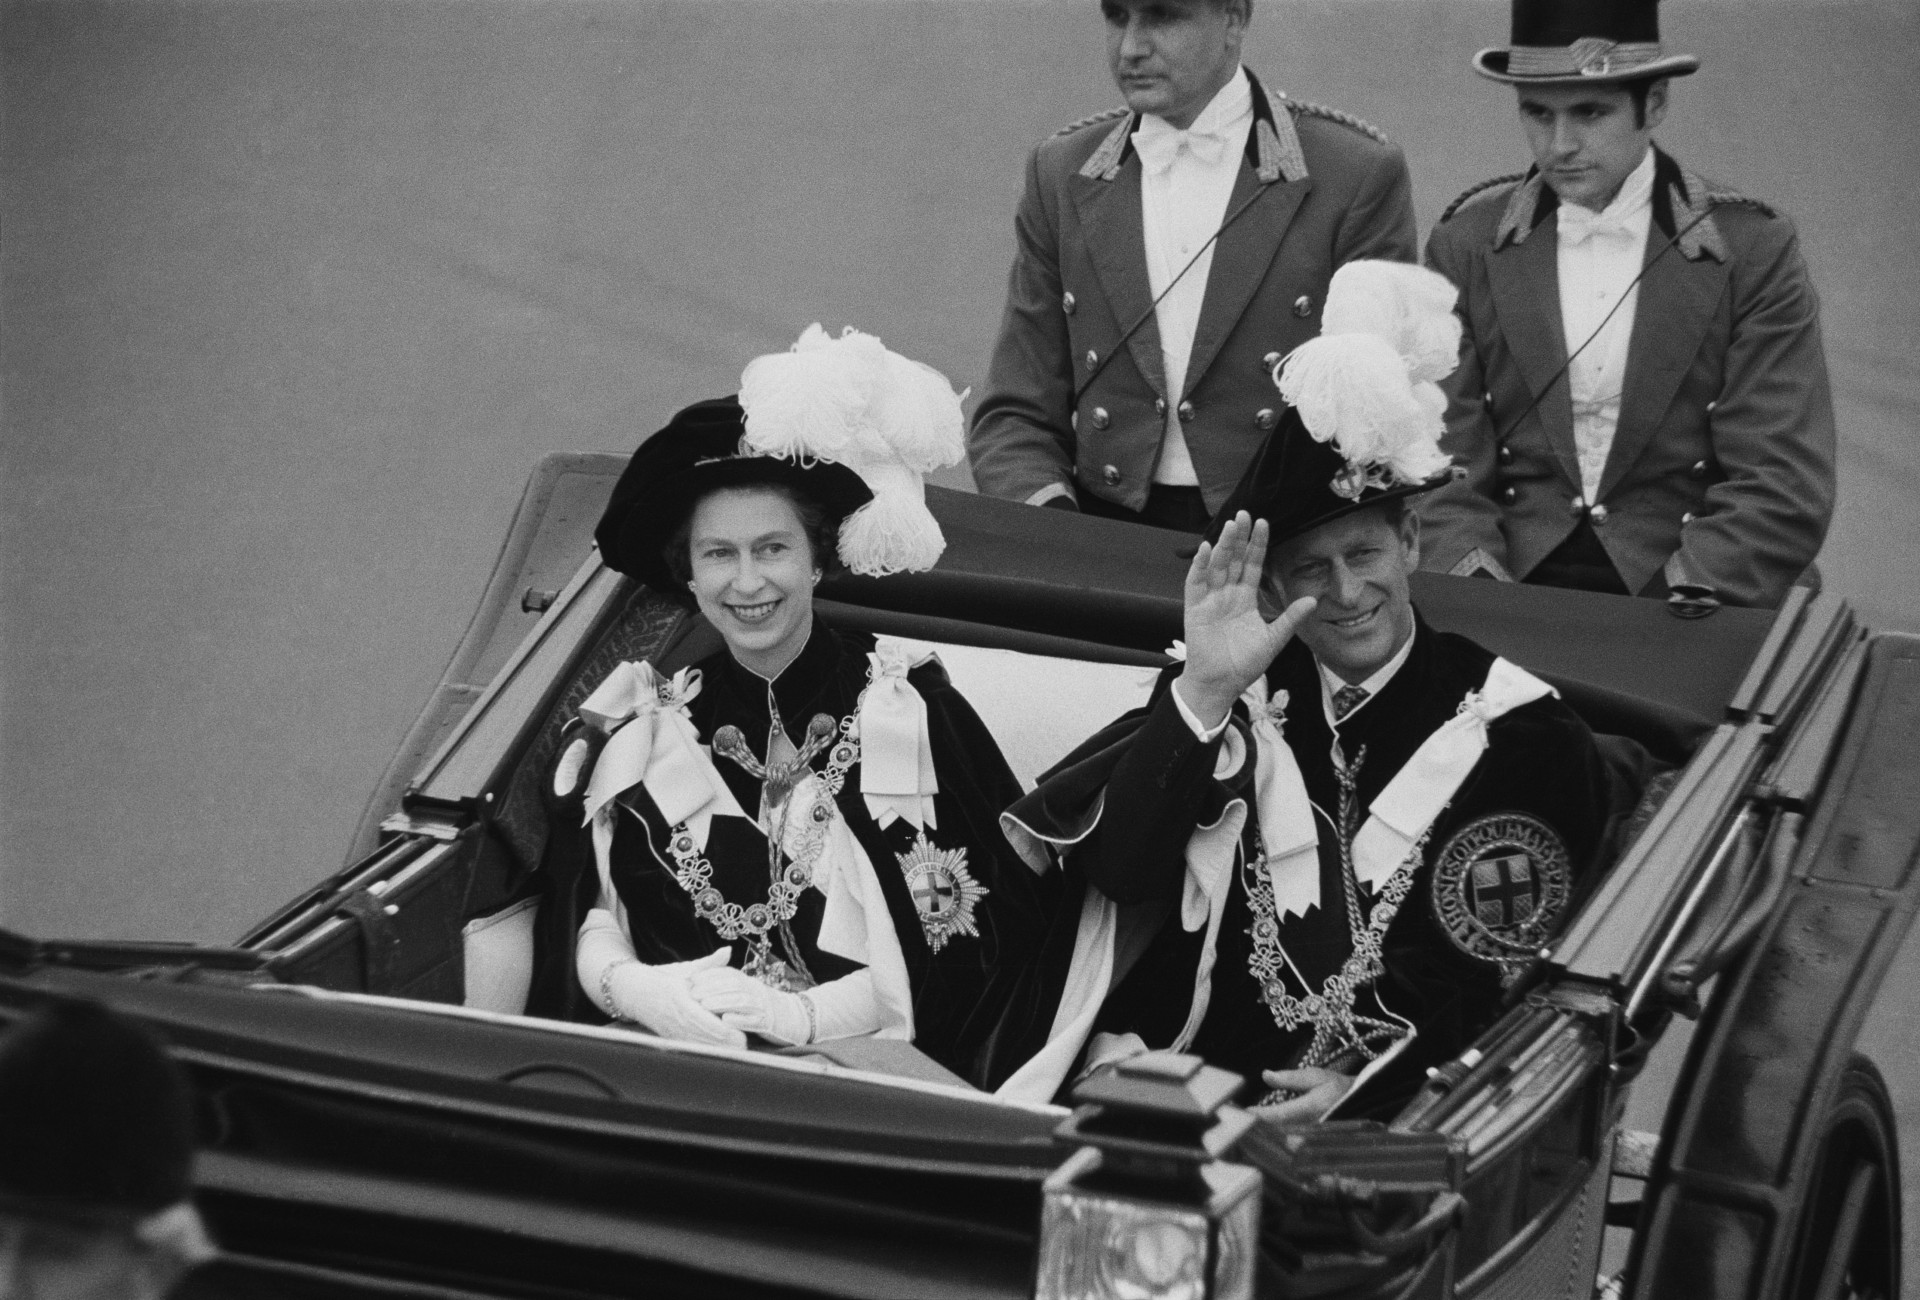 The Duke of Edinburgh and Queen Elizabeth II wave to crowds during the Garter Procession at Windsor Castle.<p>You may also like:<a href="https://www.starsinsider.com/n/444700?utm_source=msn.com&utm_medium=display&utm_campaign=referral_description&utm_content=705778en-za"> Oldest food discoveries from around the world</a></p>